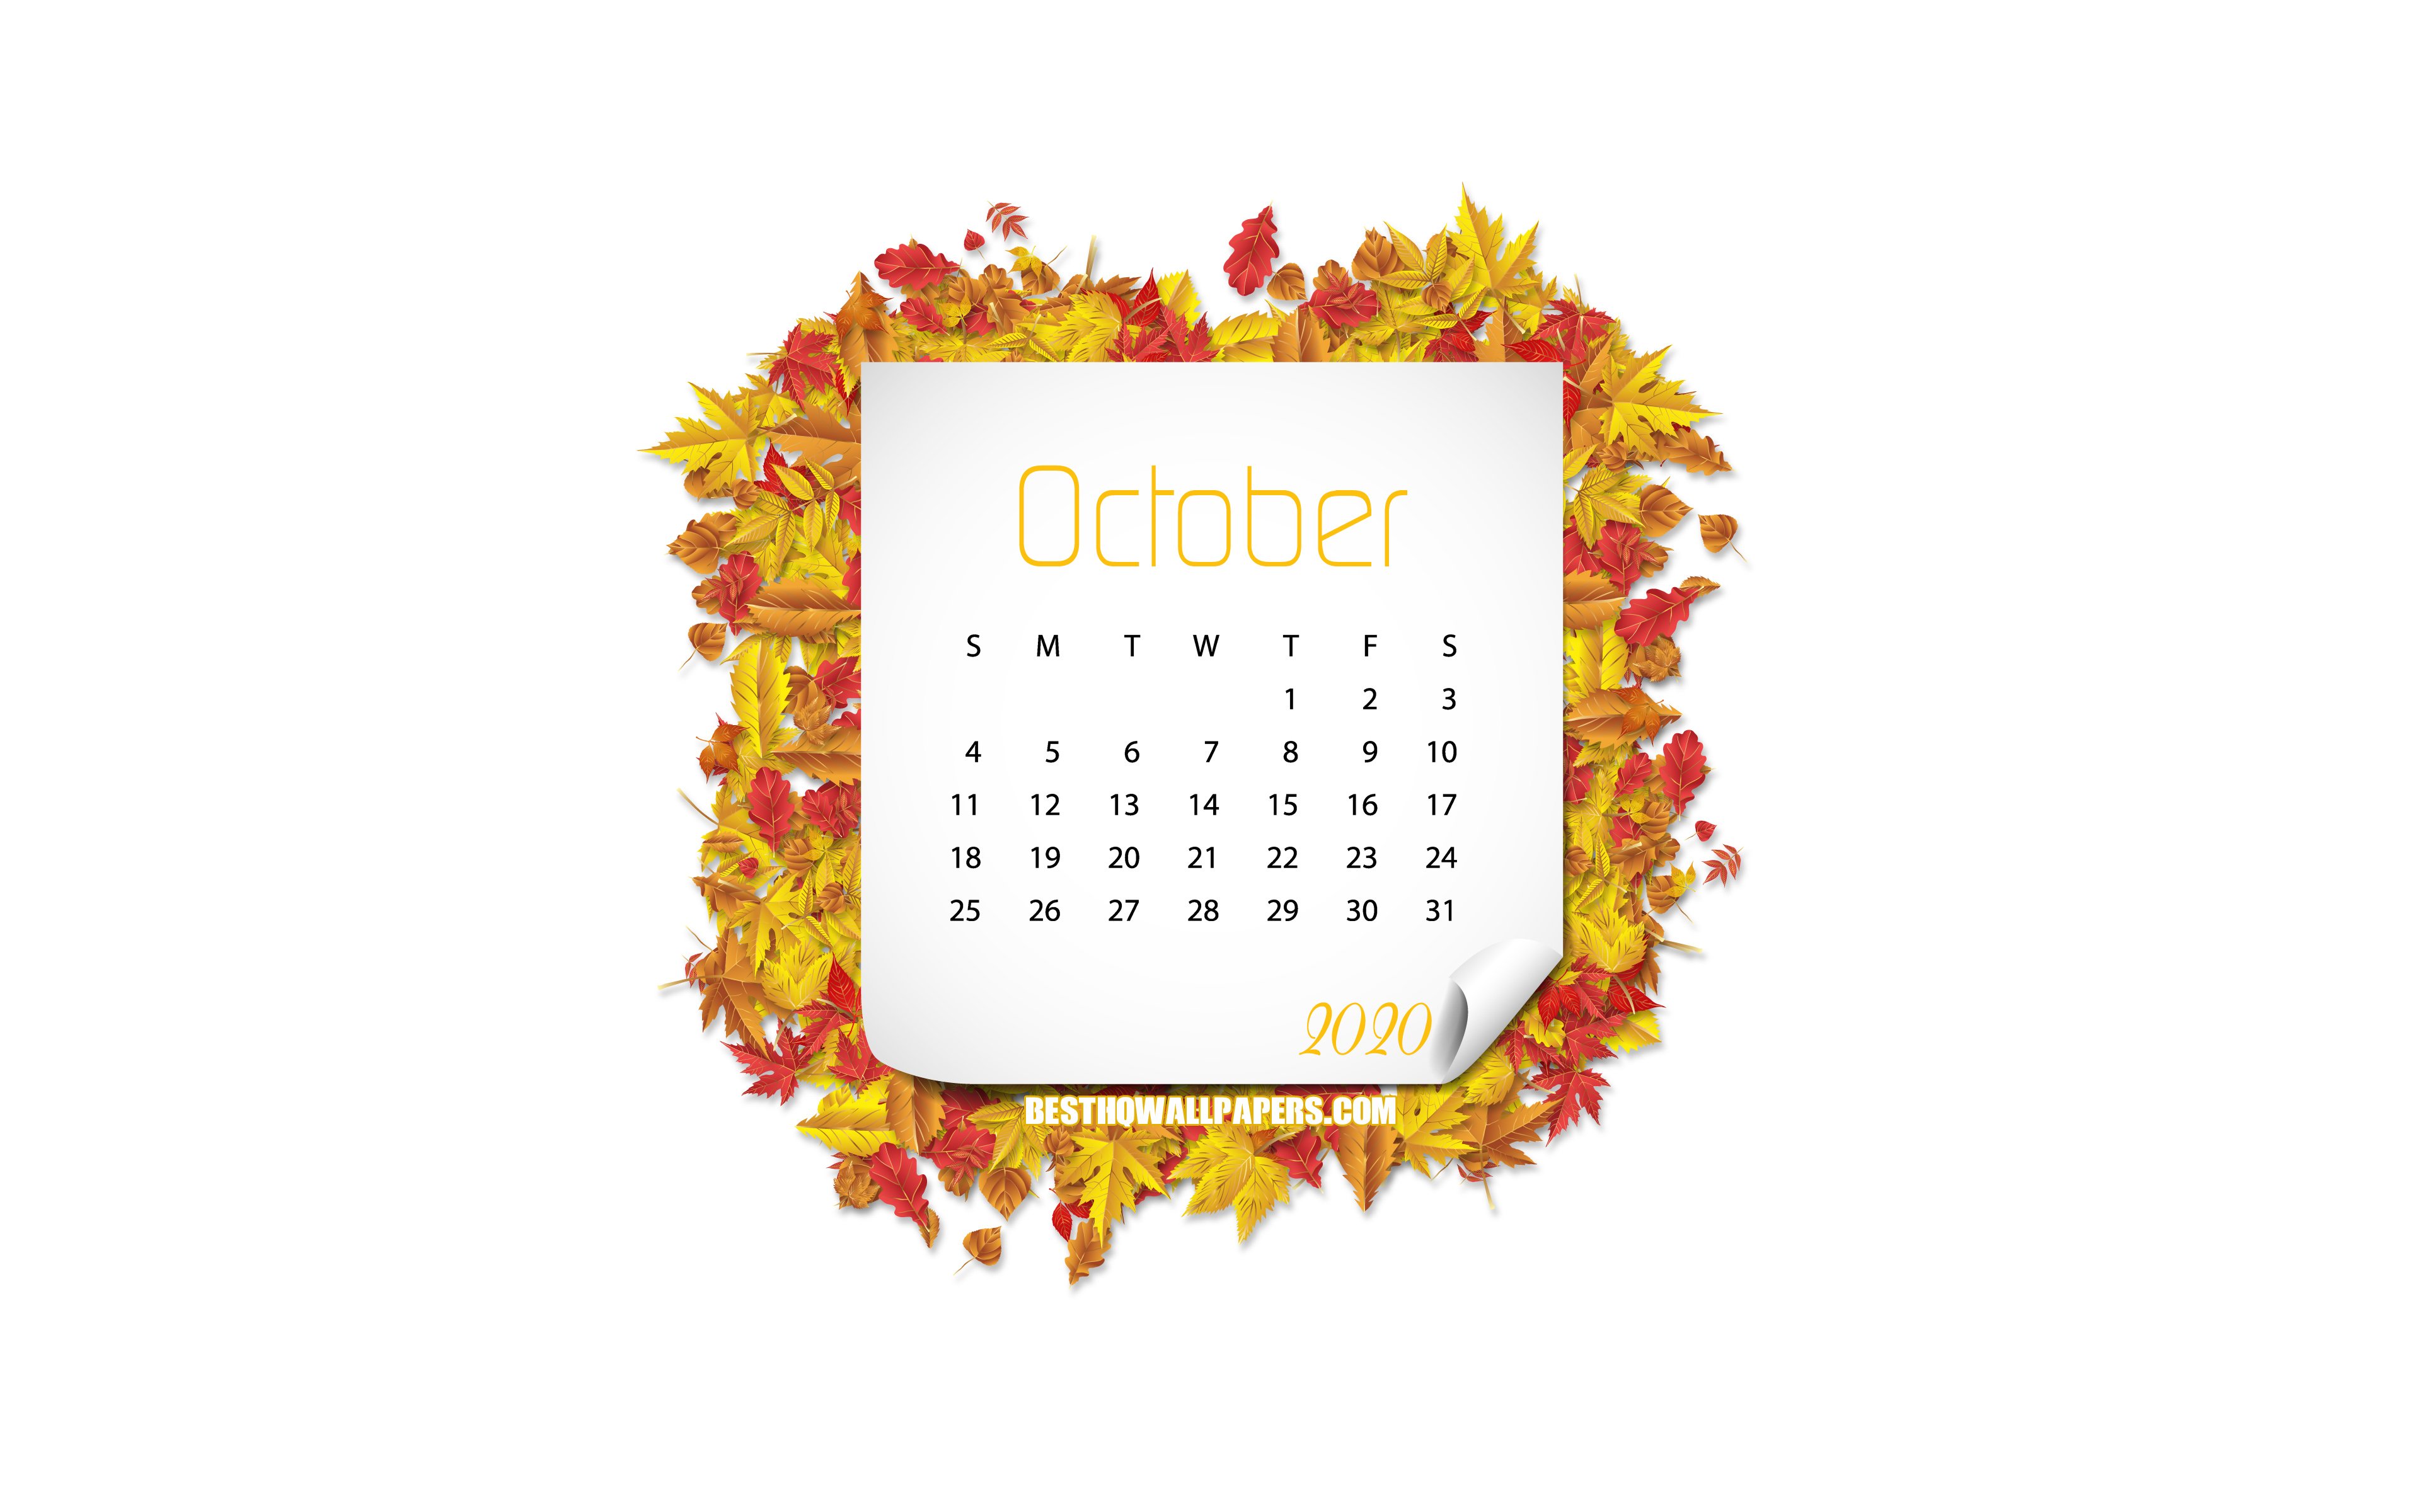 Download wallpapers 2020 October Calendar white background autumn